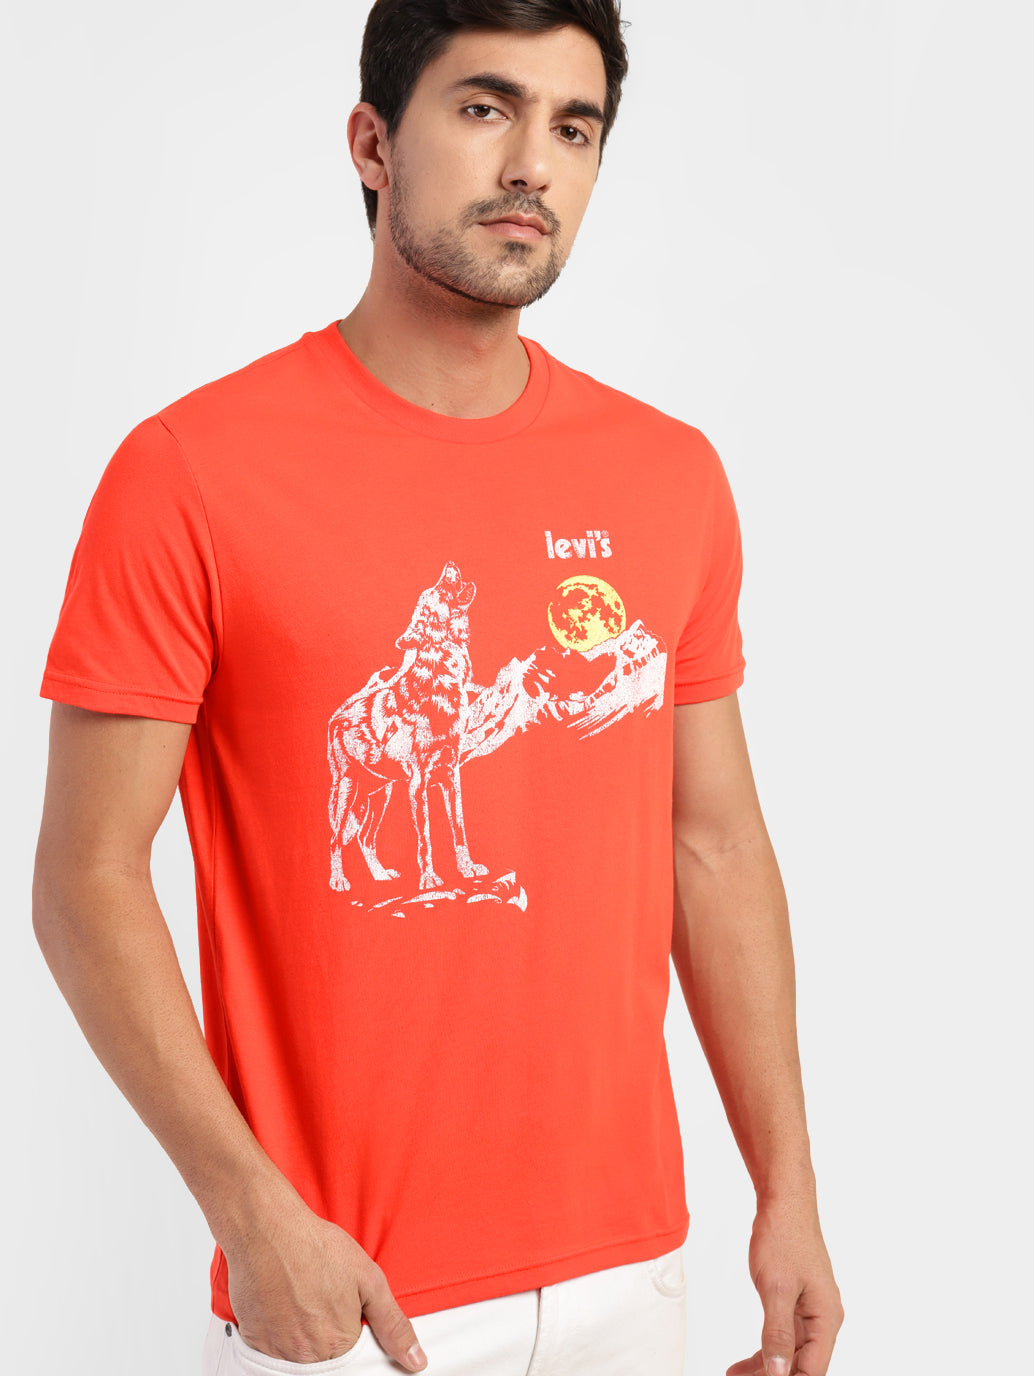 Men's Graphic Print Slim Fit T-shirt Red